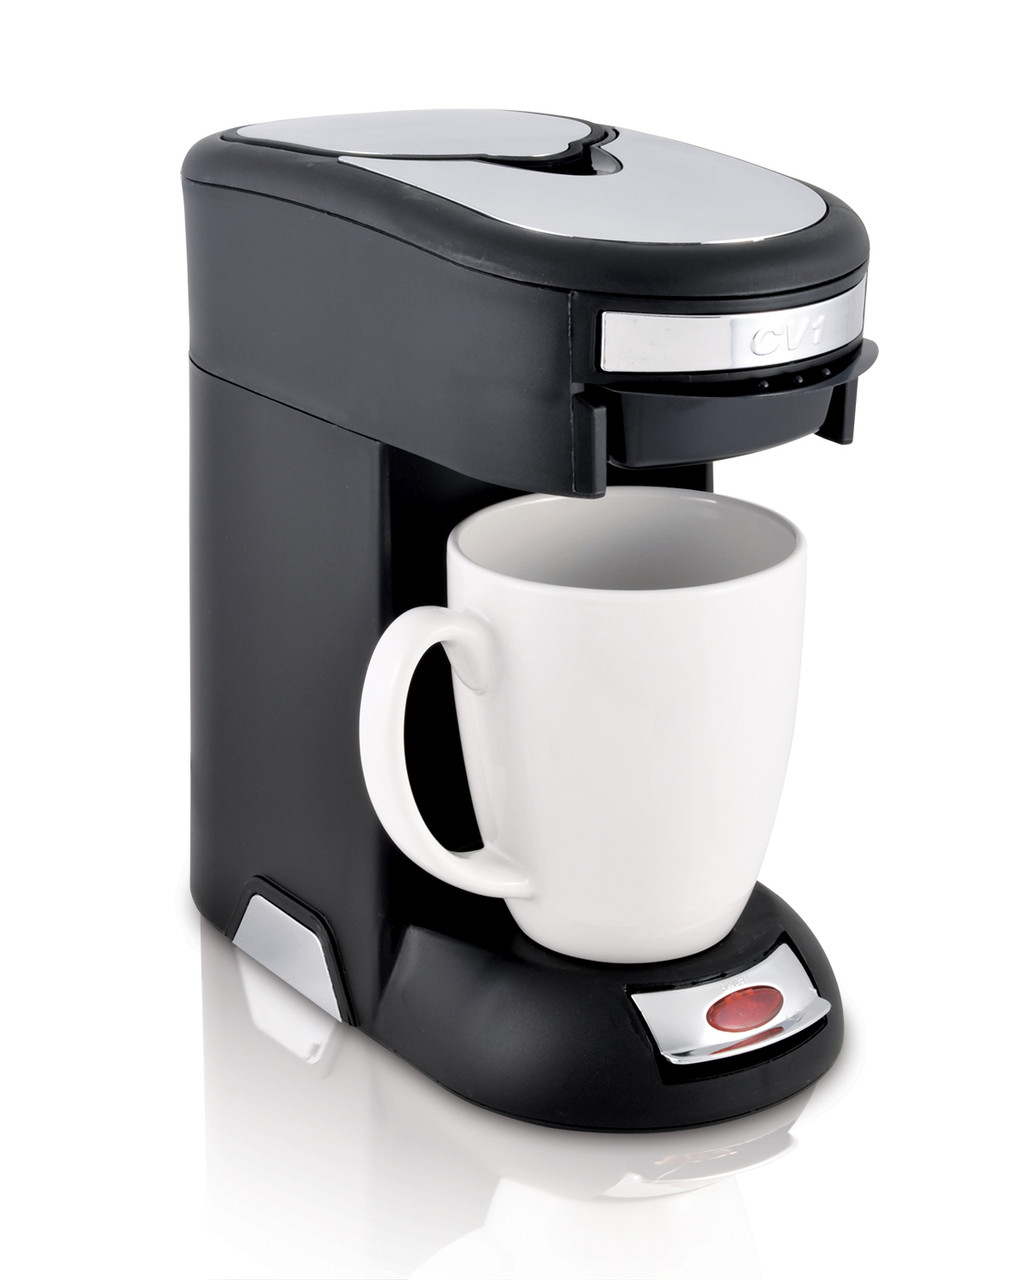 Hamilton Beach Coffee Maker, Commercial In Room Coffee Brewer